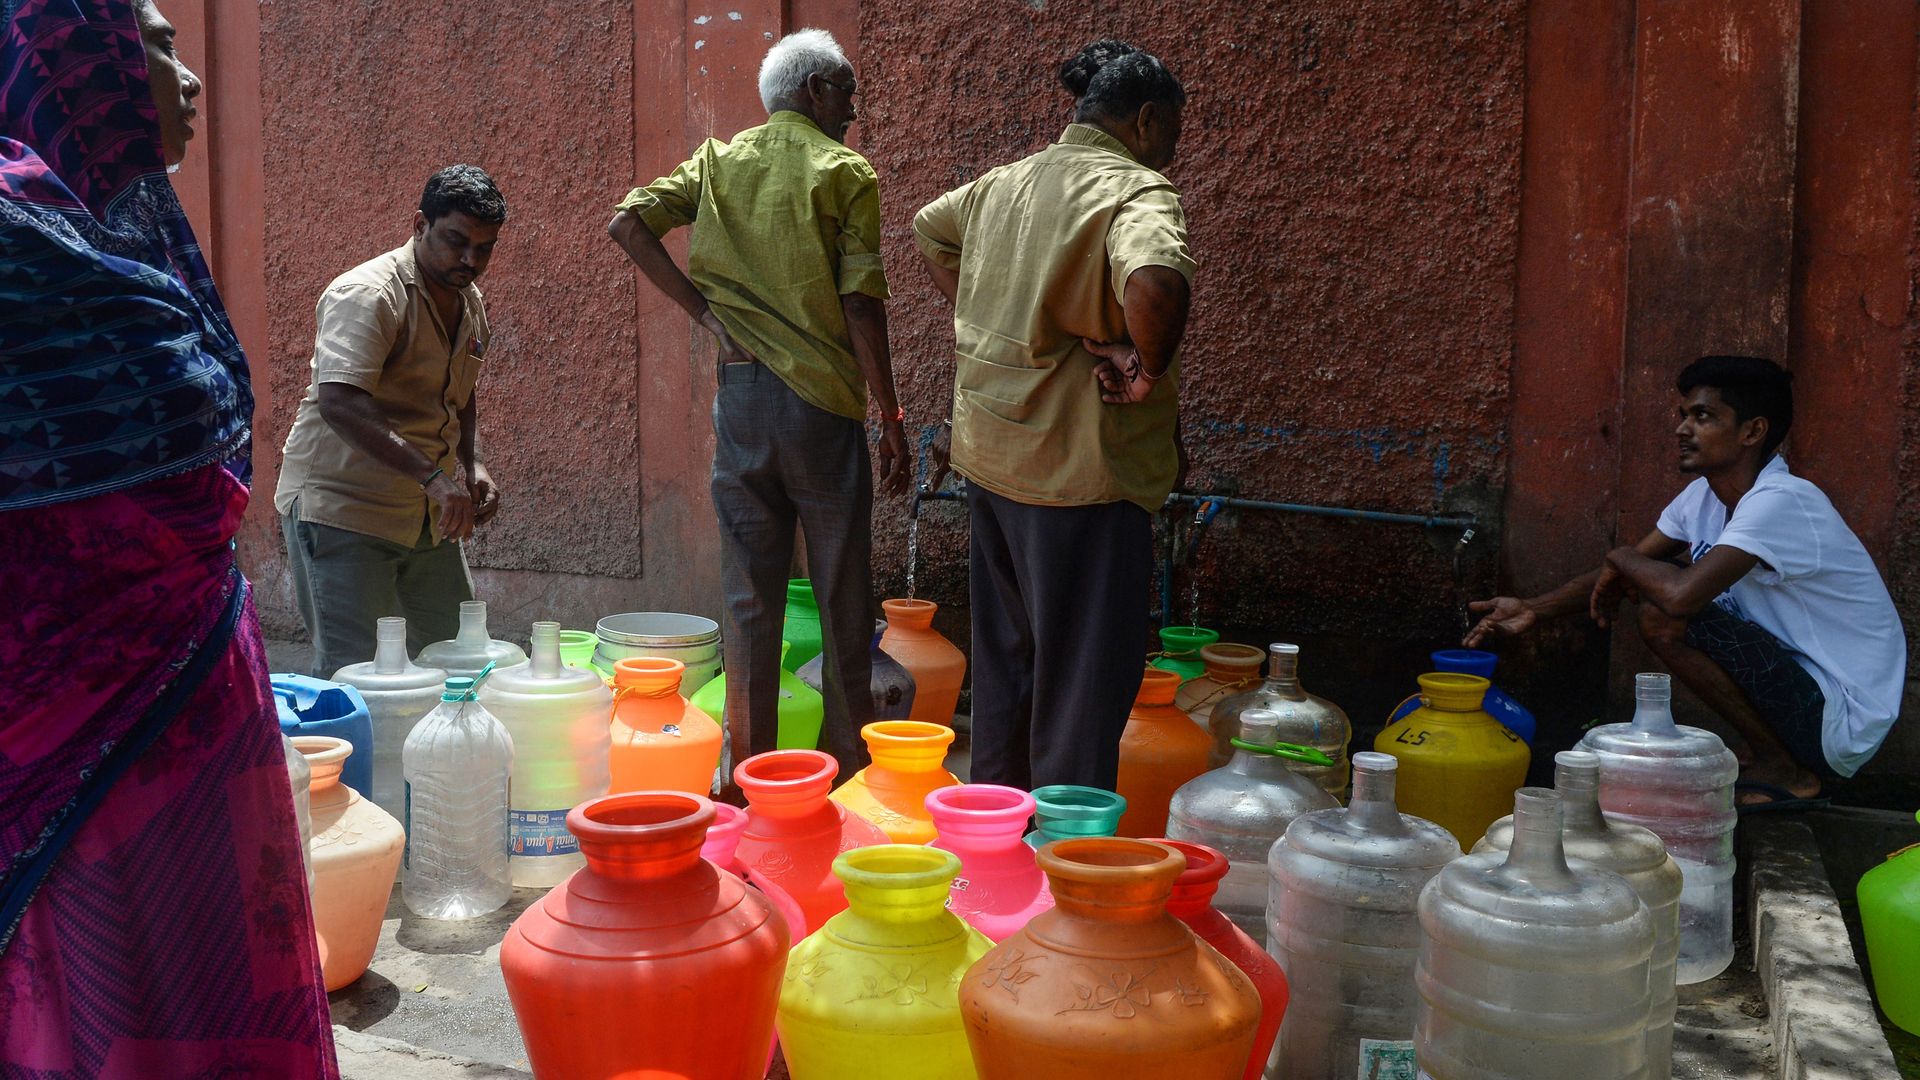 People gather around jugs of water.